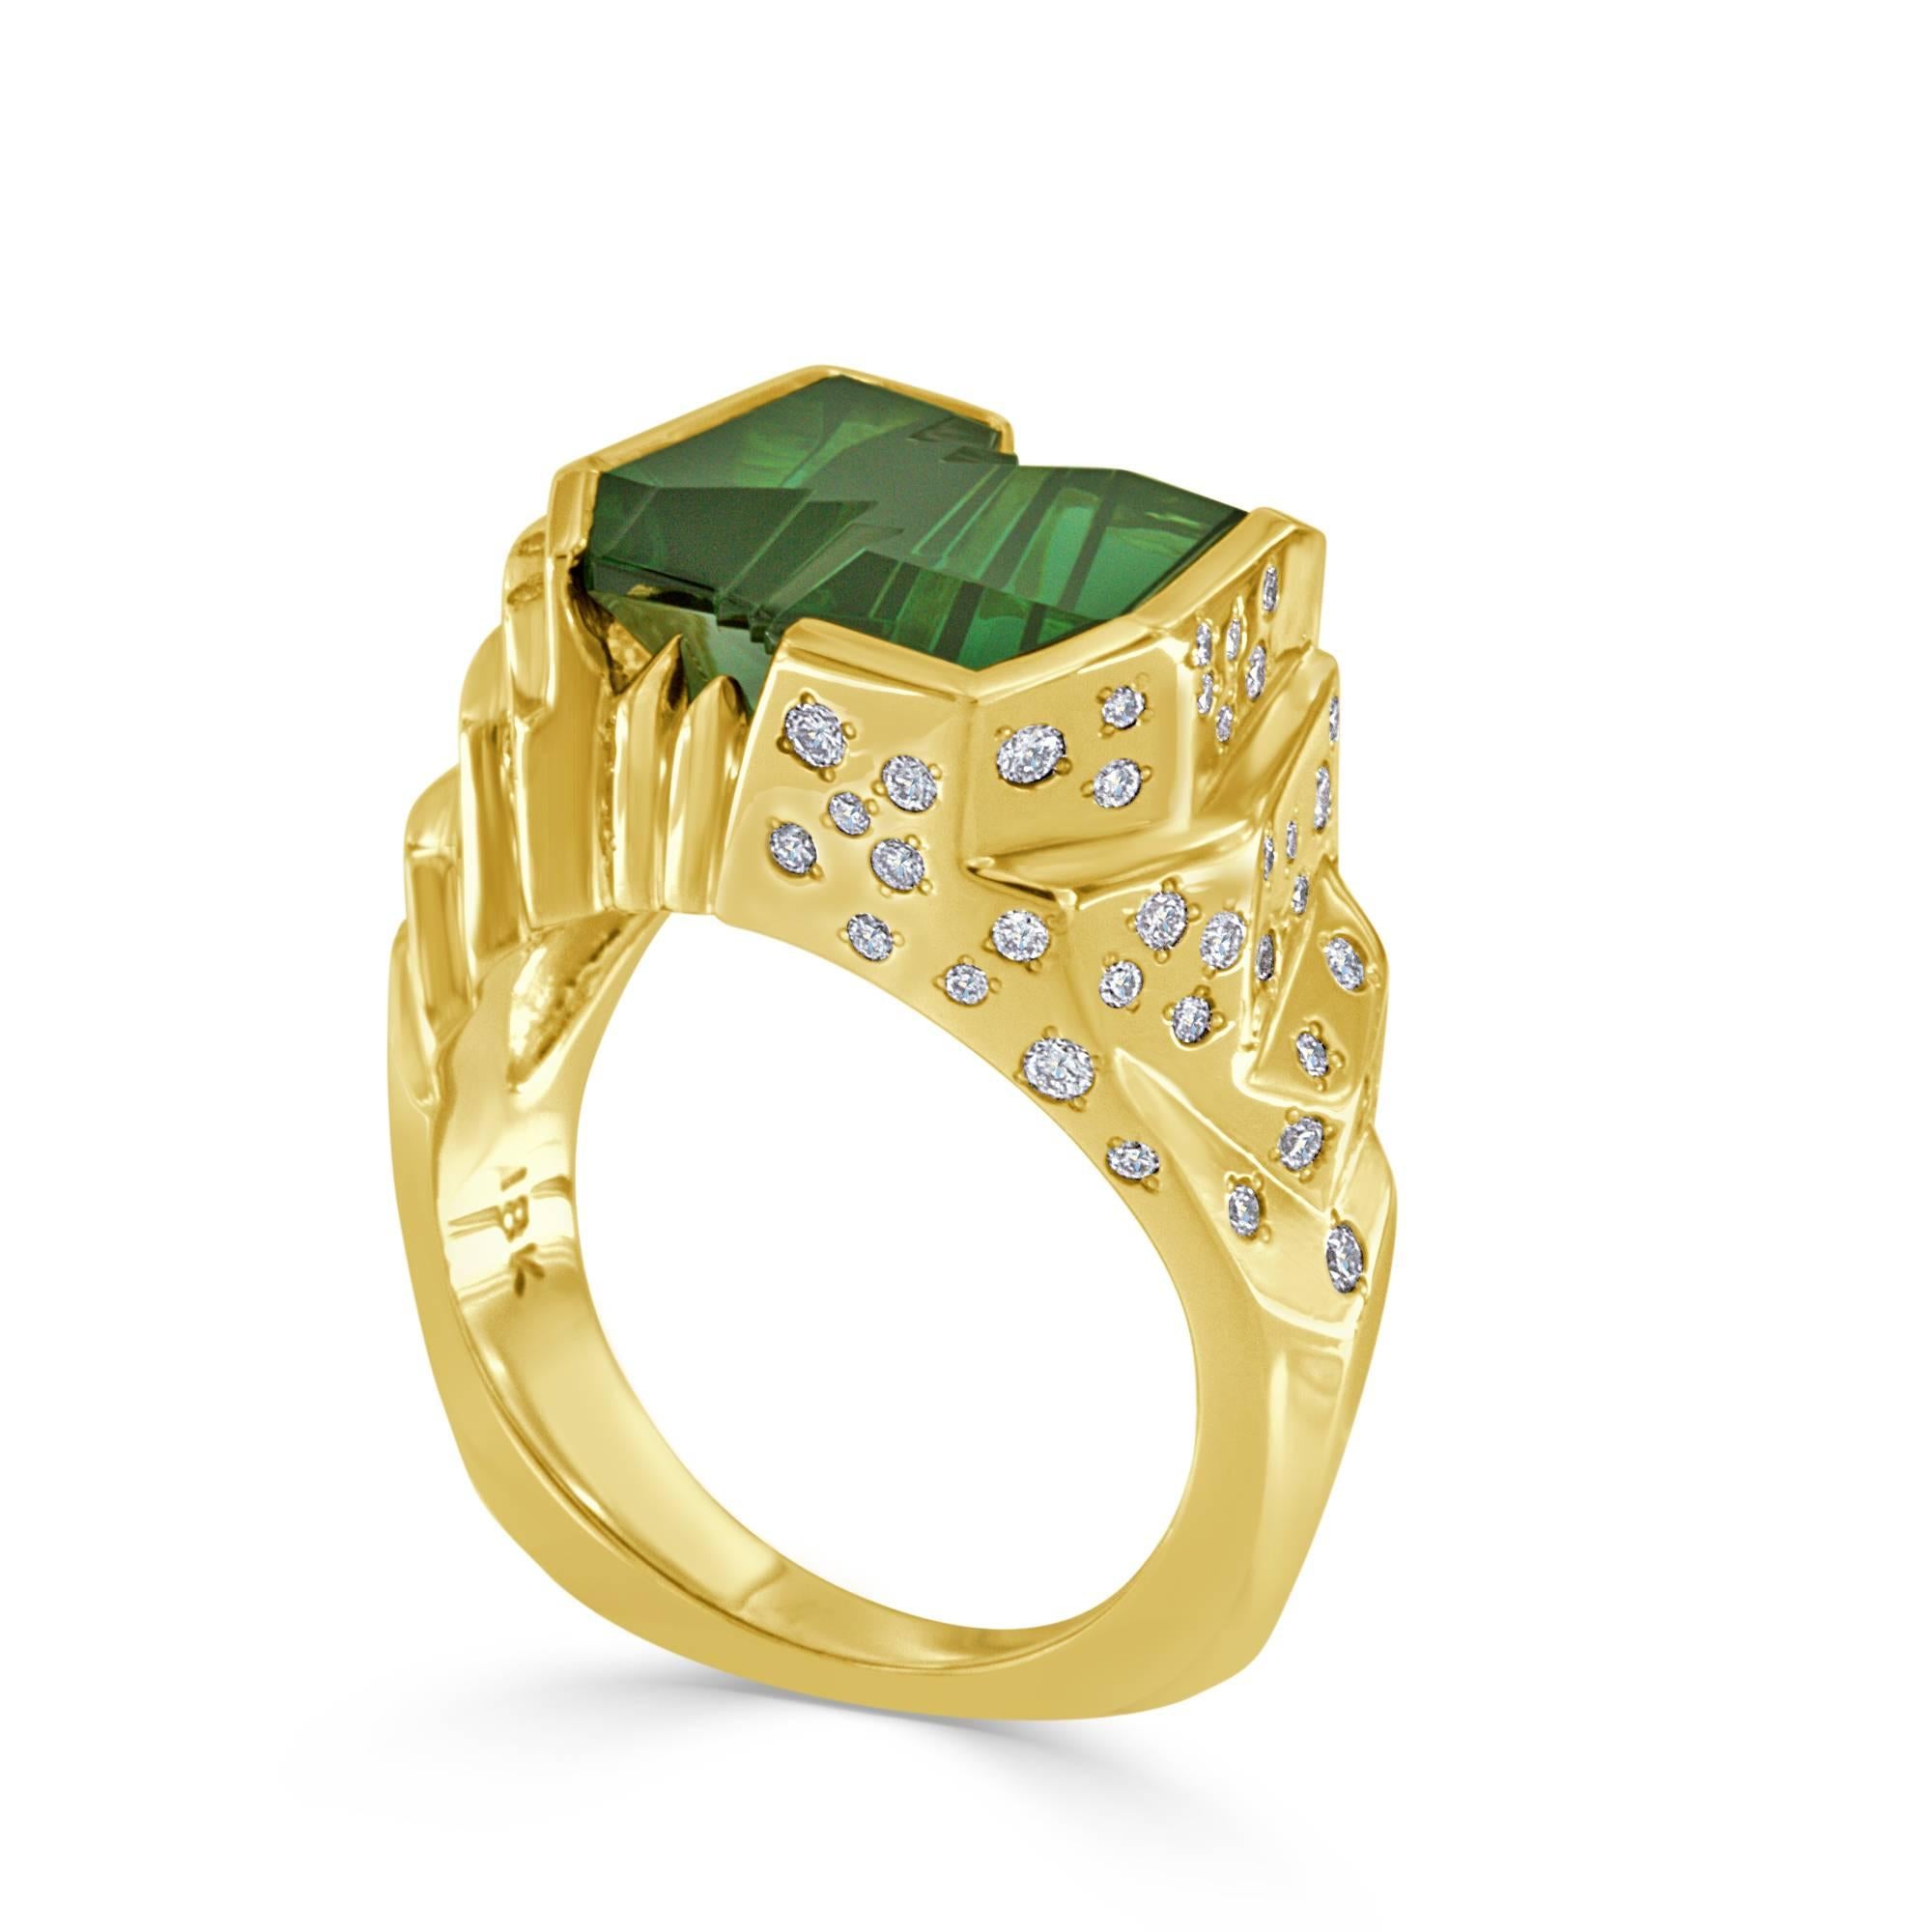 This ring is truly one-of-a-kind and rare piece, featuring a fantasy cut green tourmaline crafted by world renowned gem artist Bernd Munsteiner, this 6.93ct tourmaline has captivating green color. The equally unique 18 karat yellow gold ring